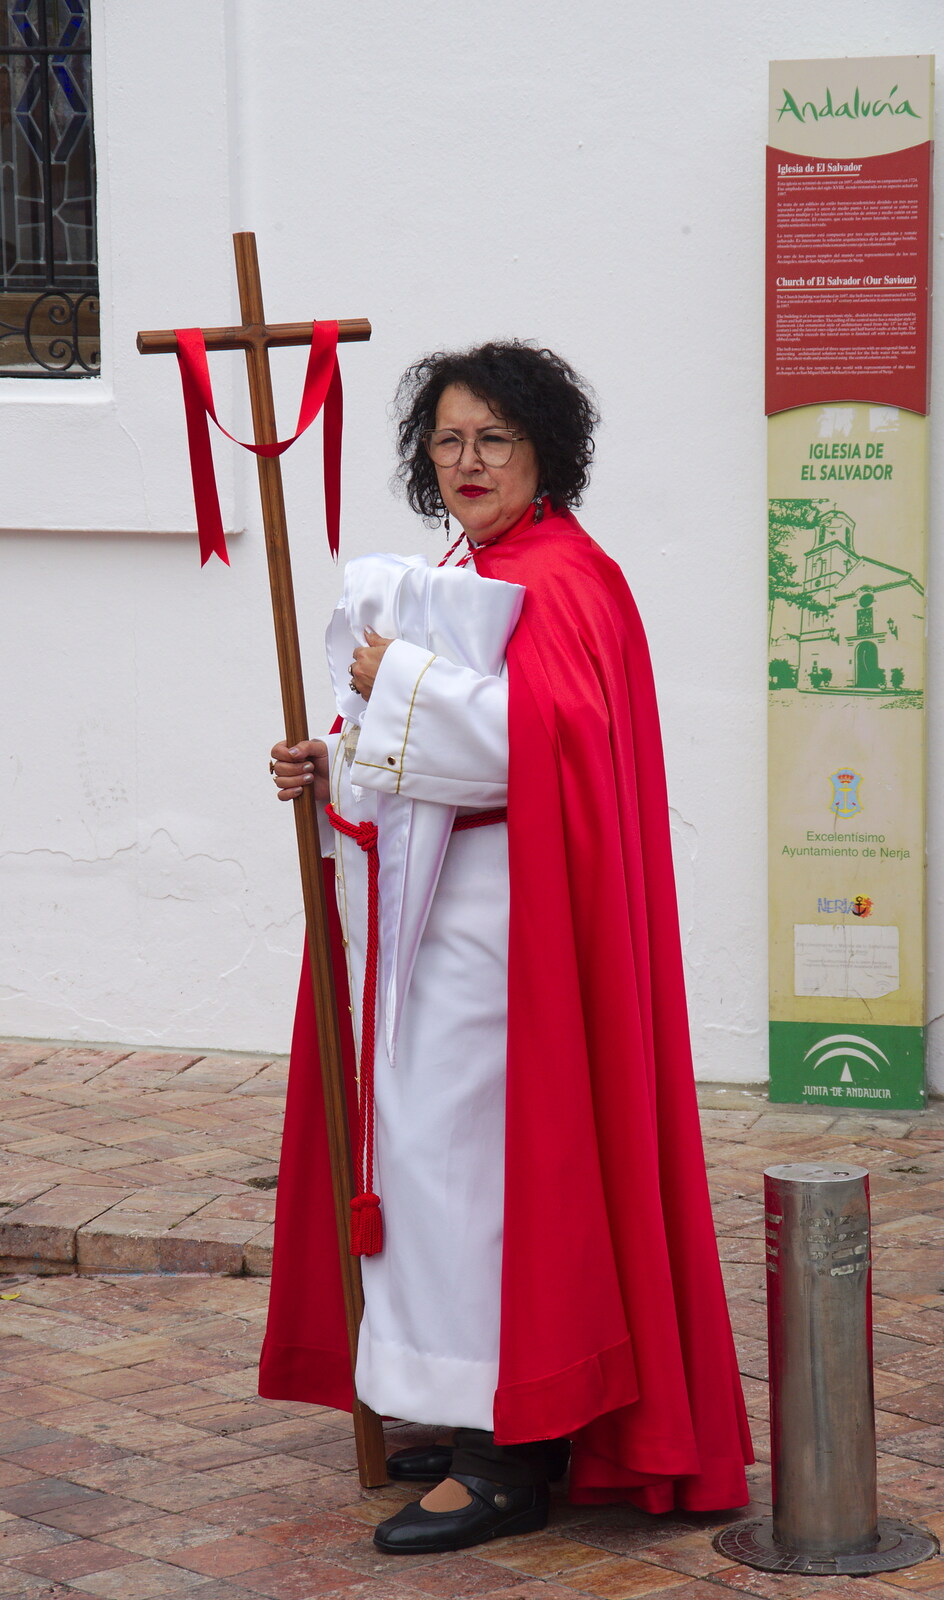 A woman with a cross from An Easter Parade, Nerja, Andalusia, Spain - 21st April 2019